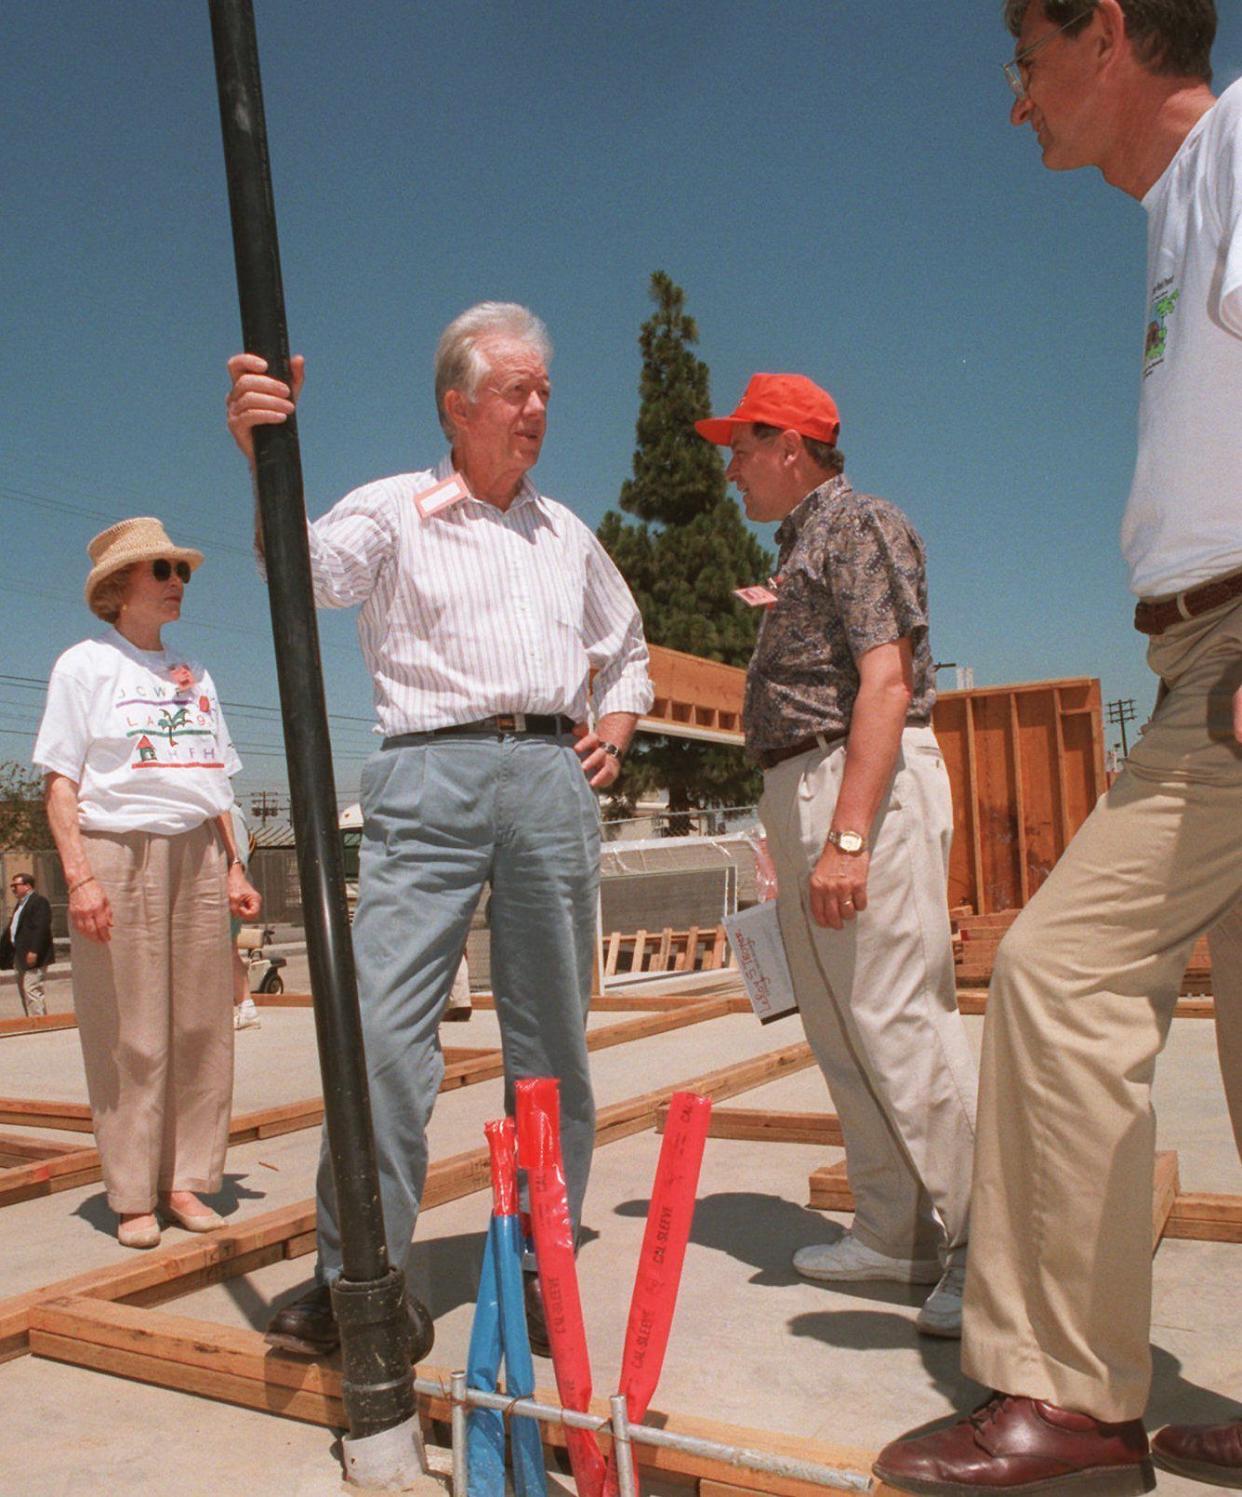 Former President Jimmy Carter, left center; and his wife Roselynn, left; listen as Millard Fuller, right; president and founder of Habitat for Humanity; and Leroy Troyer discuss the layout of a house on June 18, 1995, which will be built on the foundation they are standing on in a remarkable six days, in an unreported location. The former president has been a volunteer for Habitat for Humanity since 1984.